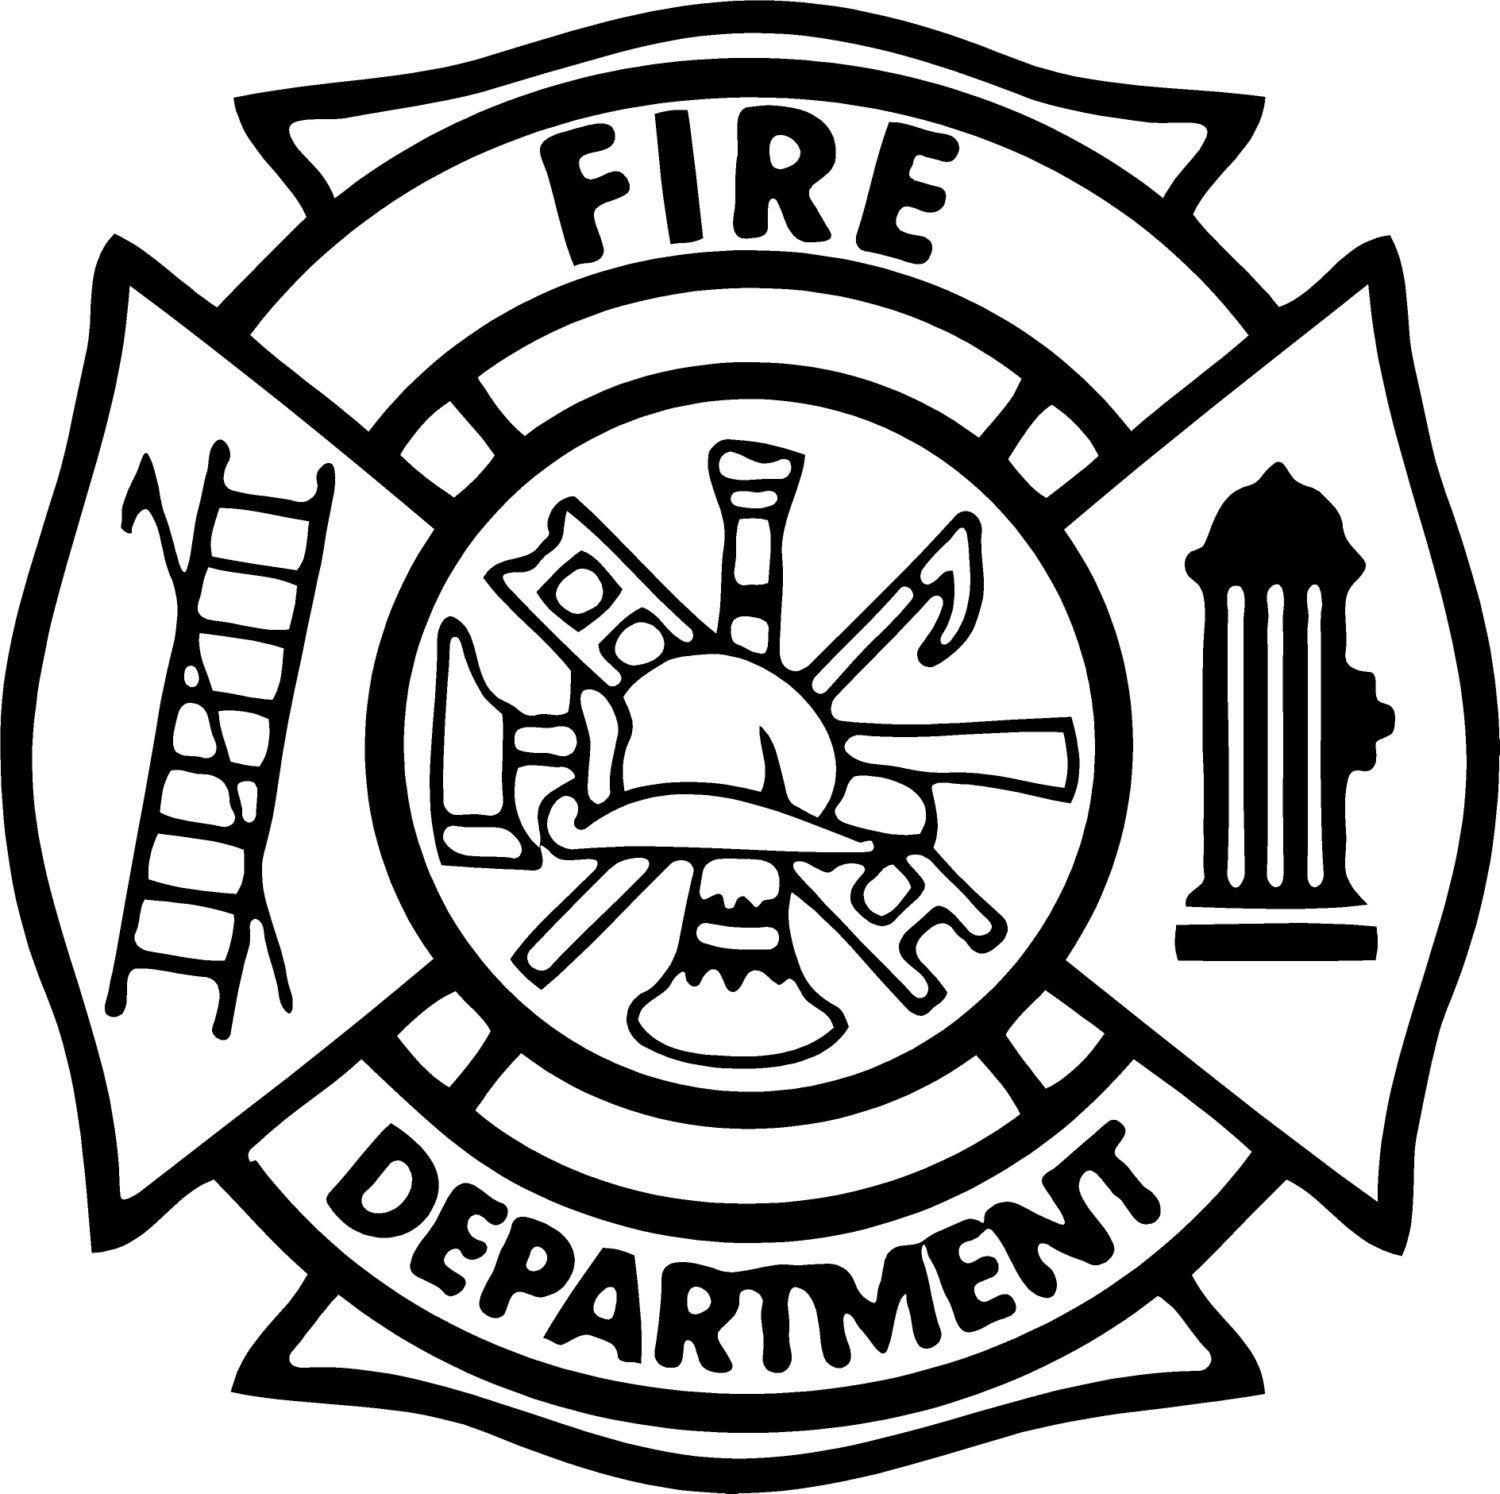 Fire Department Maltese Cross Coloring Page - Part 4 | Free Resource For  Teaching